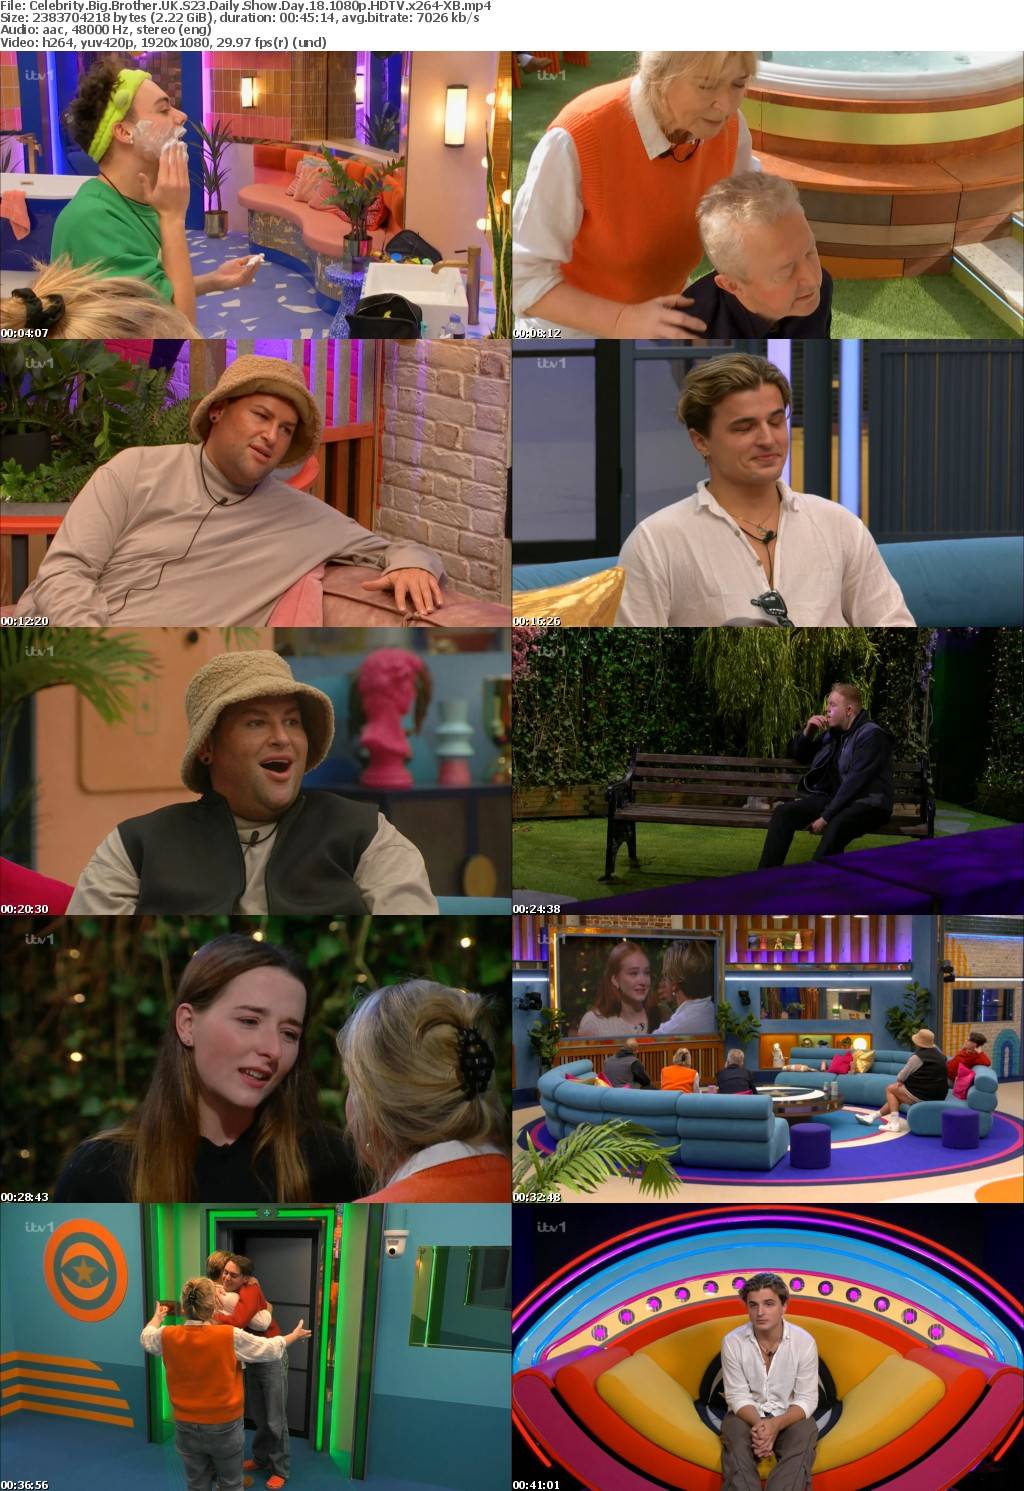 Celebrity Big Brother UK S23 Daily Show Day 18 1080p HDTV x264-XB